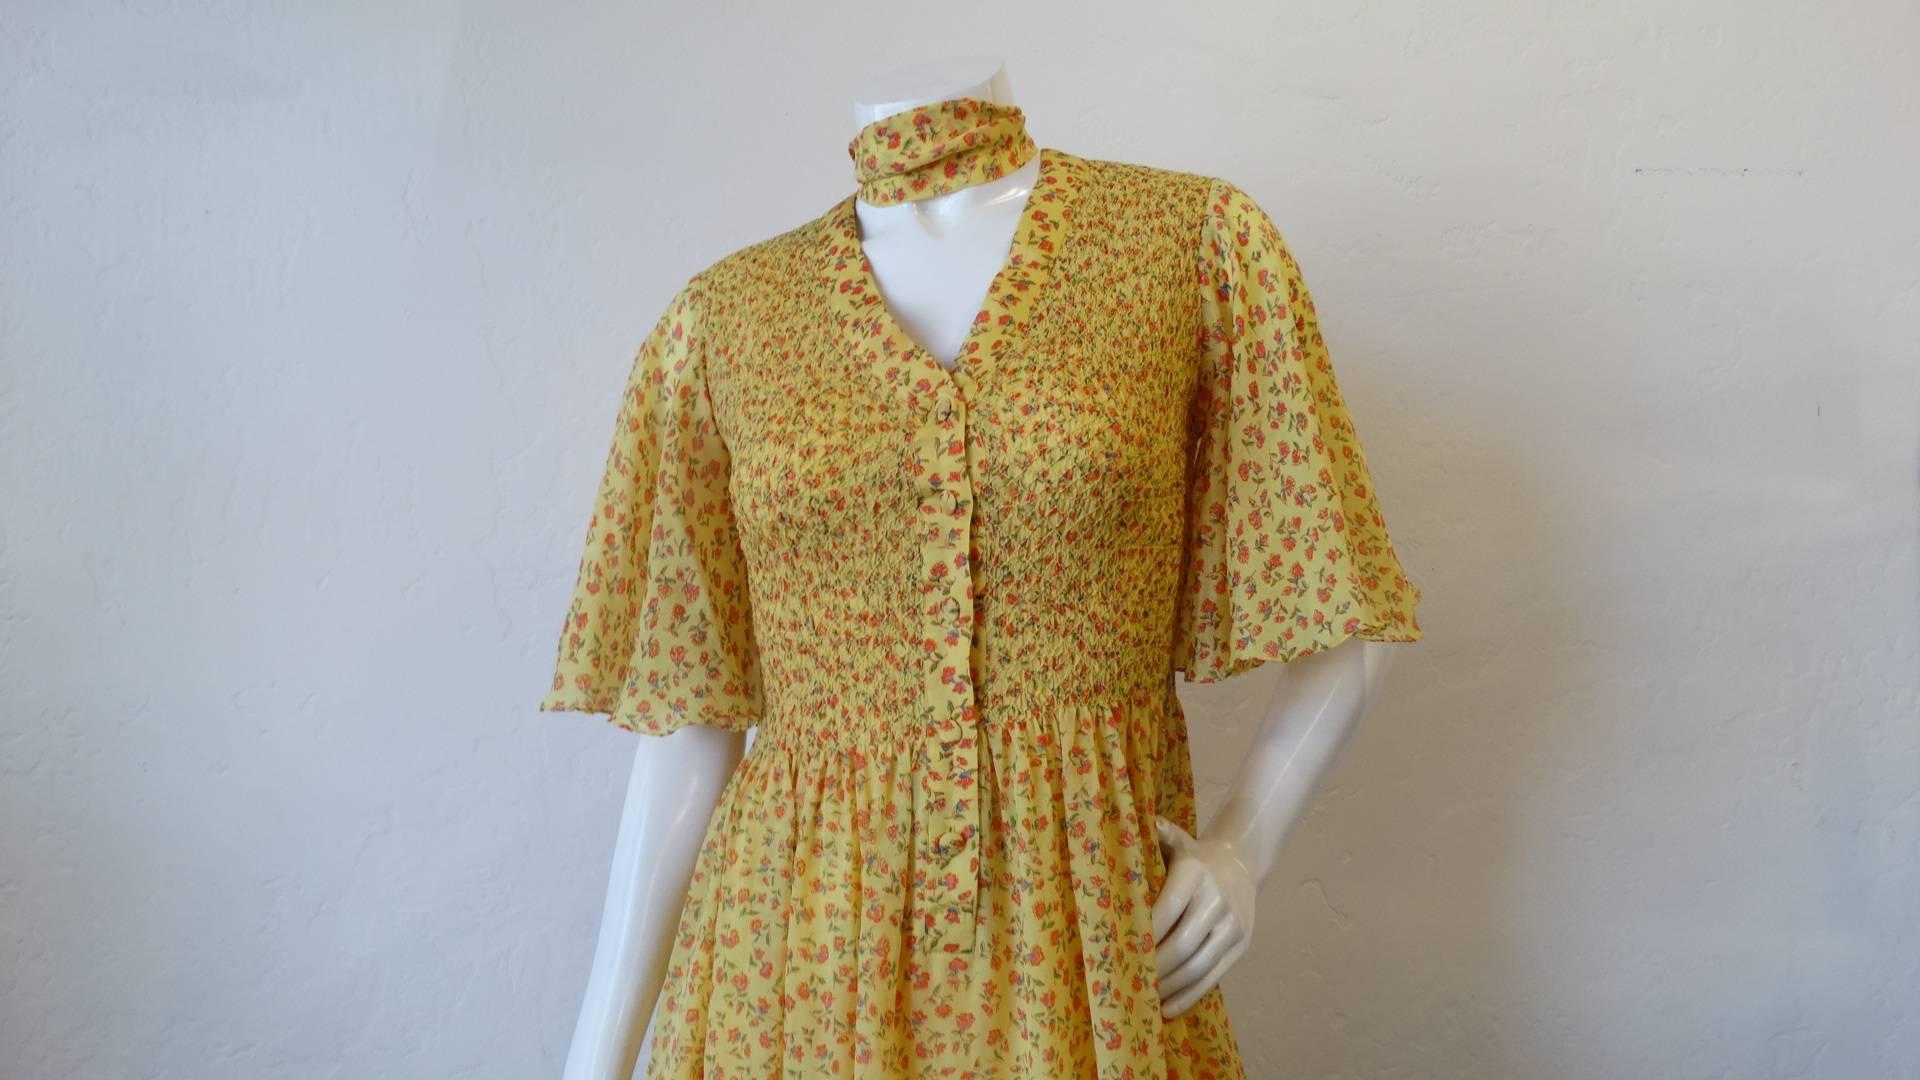 The most charming 1970s silk floral maxi dress from I.Magnin! Creamy yellow floral print with intricate 